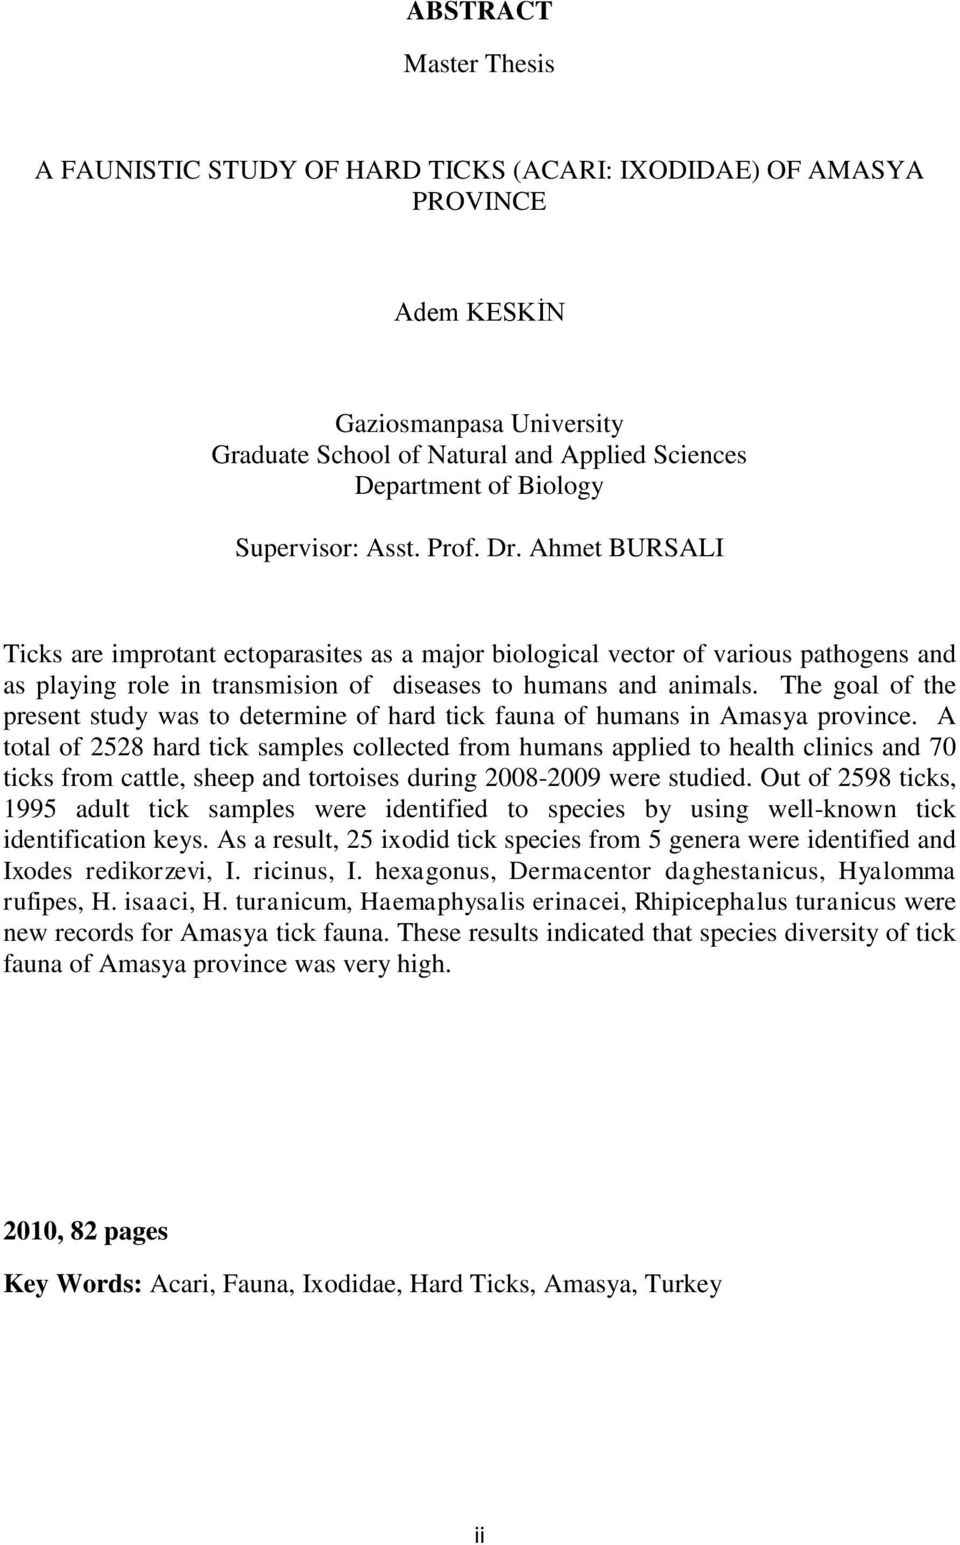 The goal of the present study was to determine of hard tick fauna of humans in Amasya province.